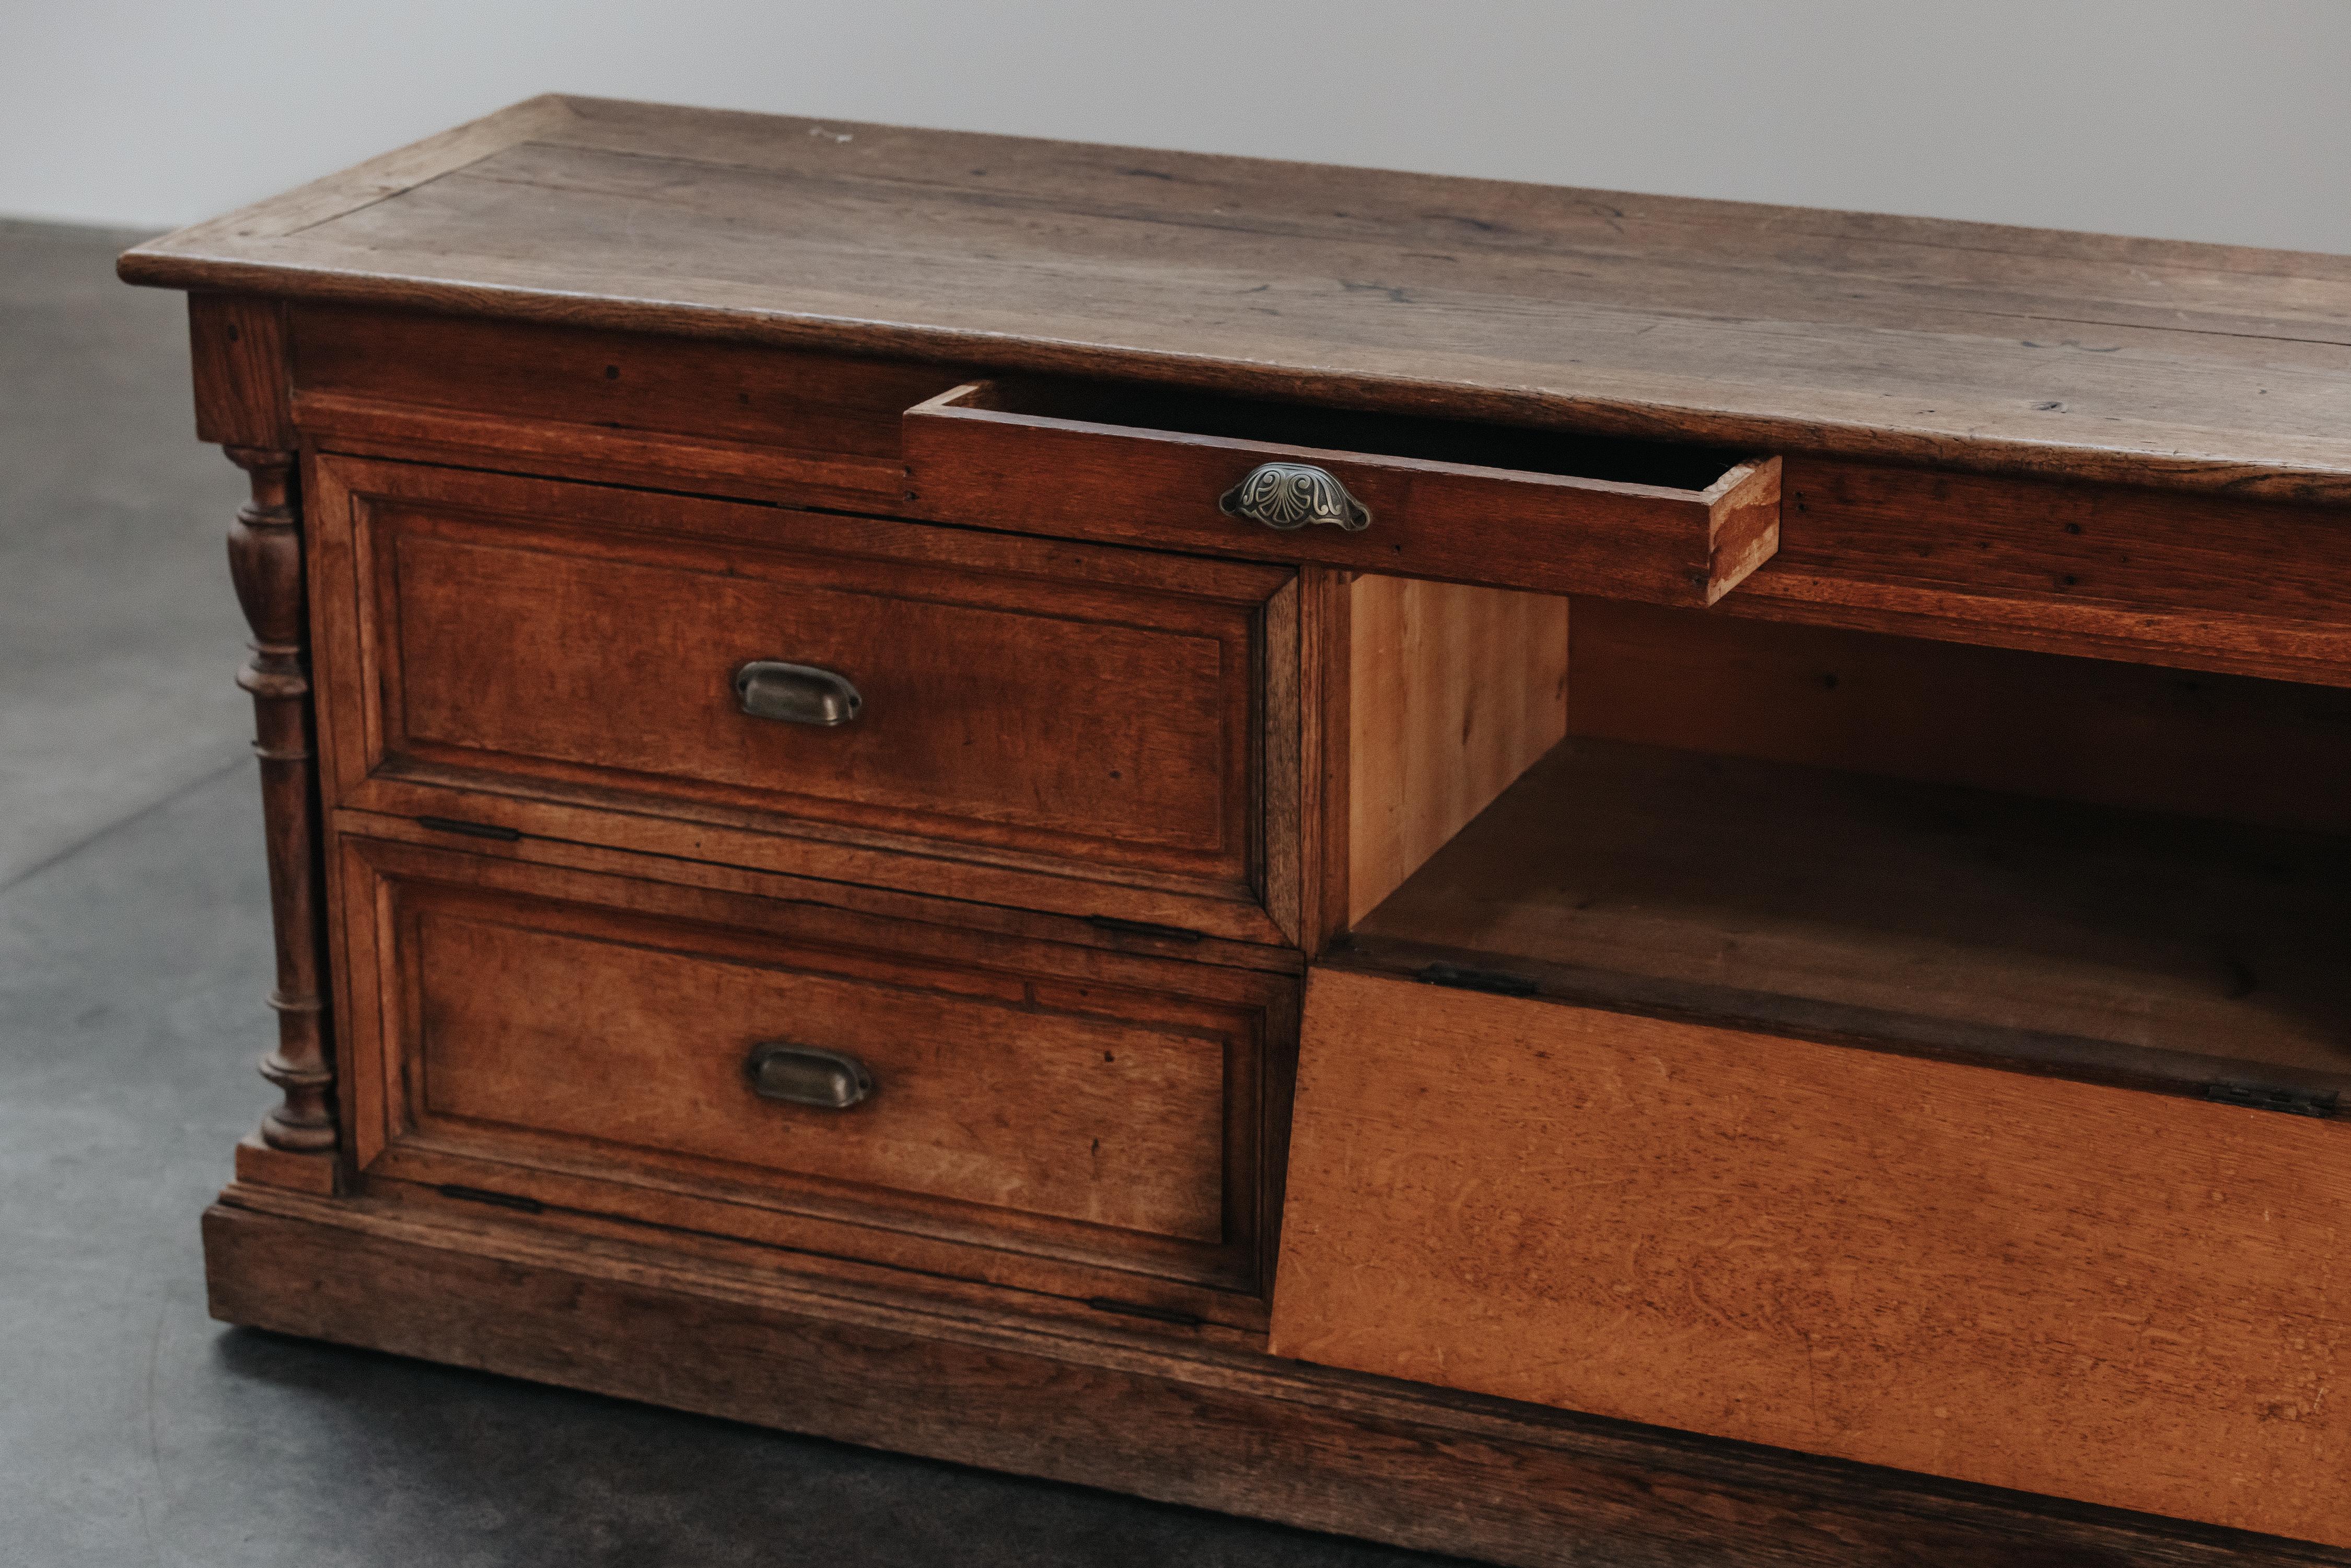 Early Double Sided Shop Counter From France, Circa 1900.  Solid oak construction with four doors and original hardware.  Great original patina and use.